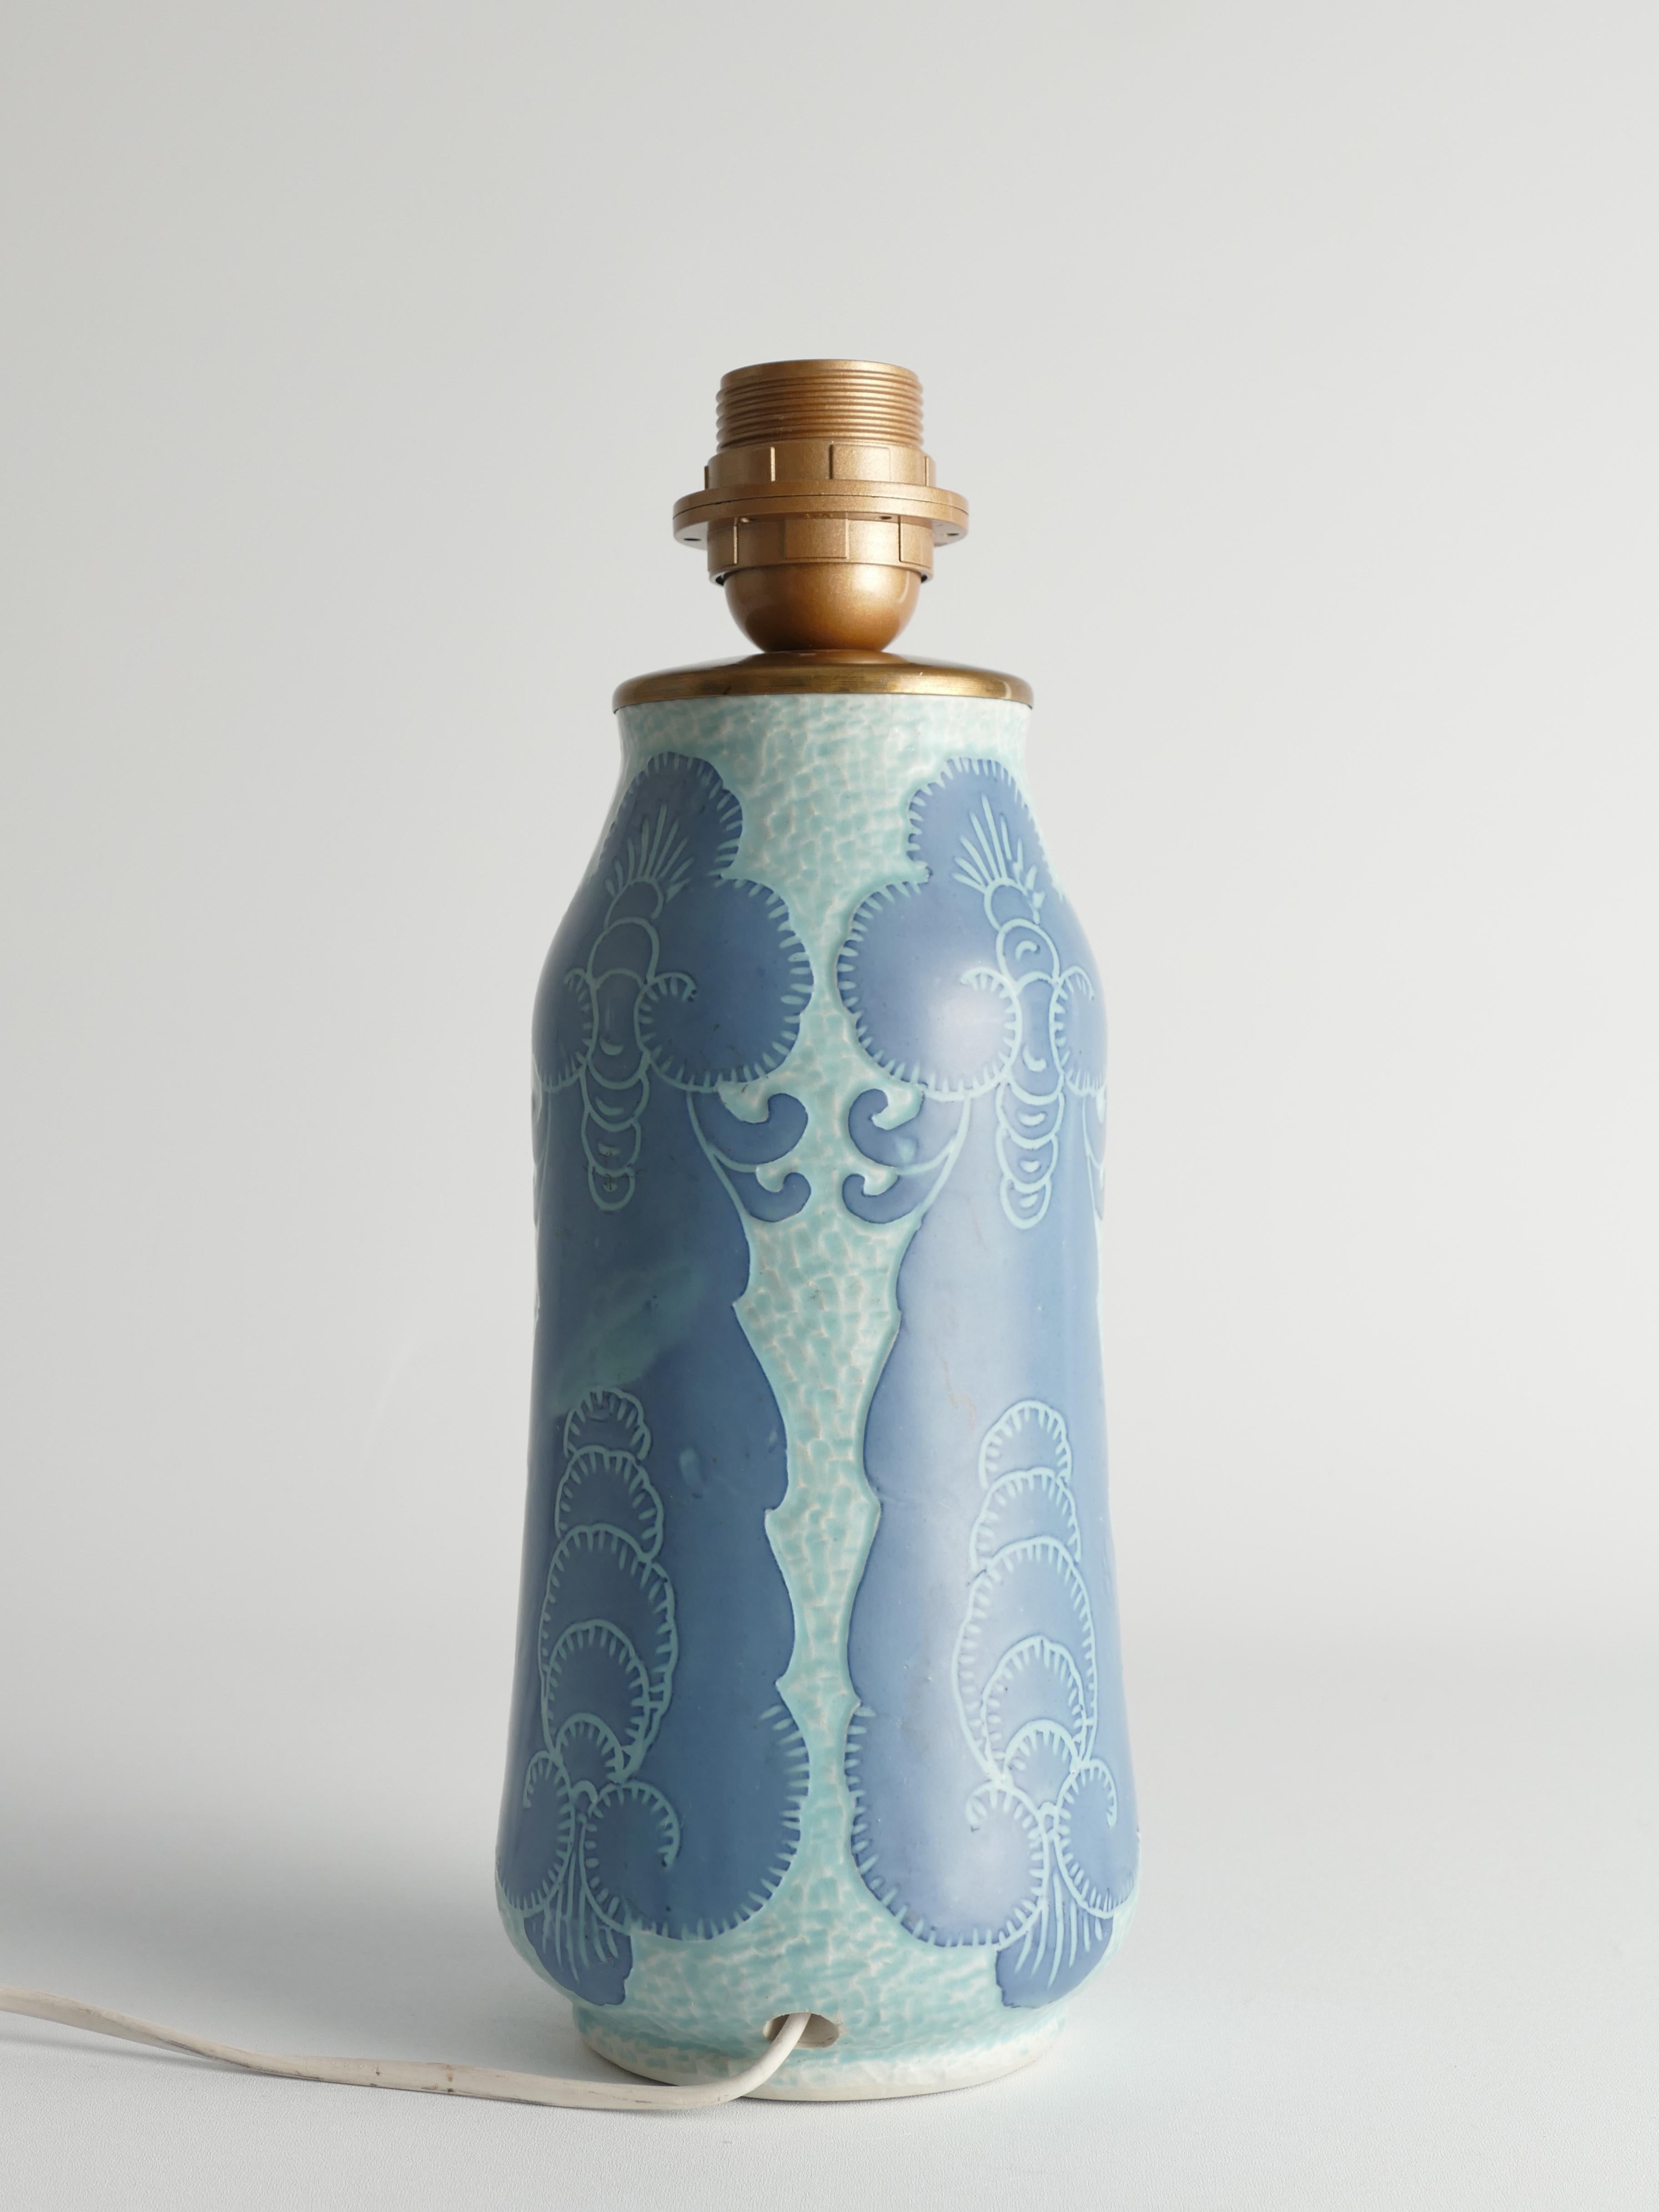 This art nouveau table lamp is designed by Josef Ekberg for Gustavsberg, Sweden, 1919. An exemplar of art nouveau design, this vase, crafted by Josef Ekberg for Gustavsberg, showcases a combination of pale blue ground and mid-blue decoration using